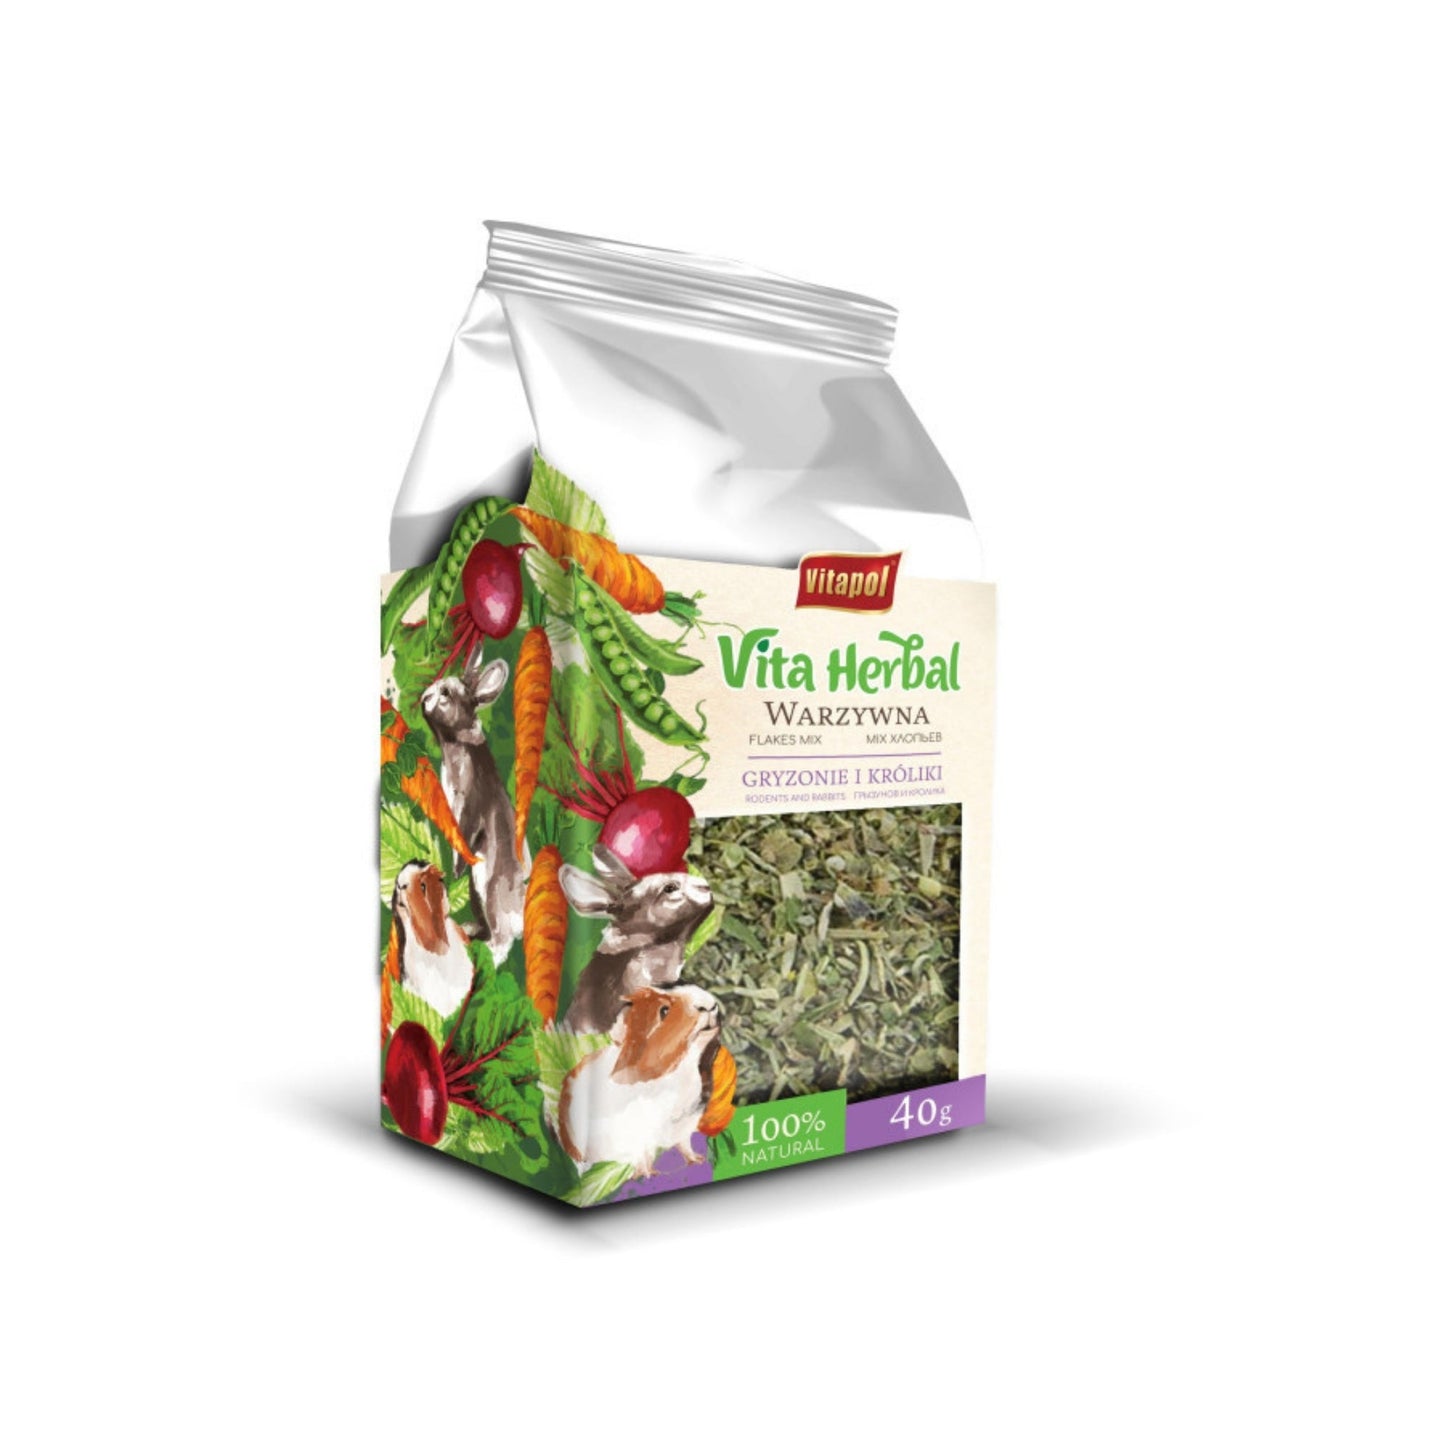 A & E Cages Vitapol Vita Herbal Vegetable Patch Mix 1ea/40 g